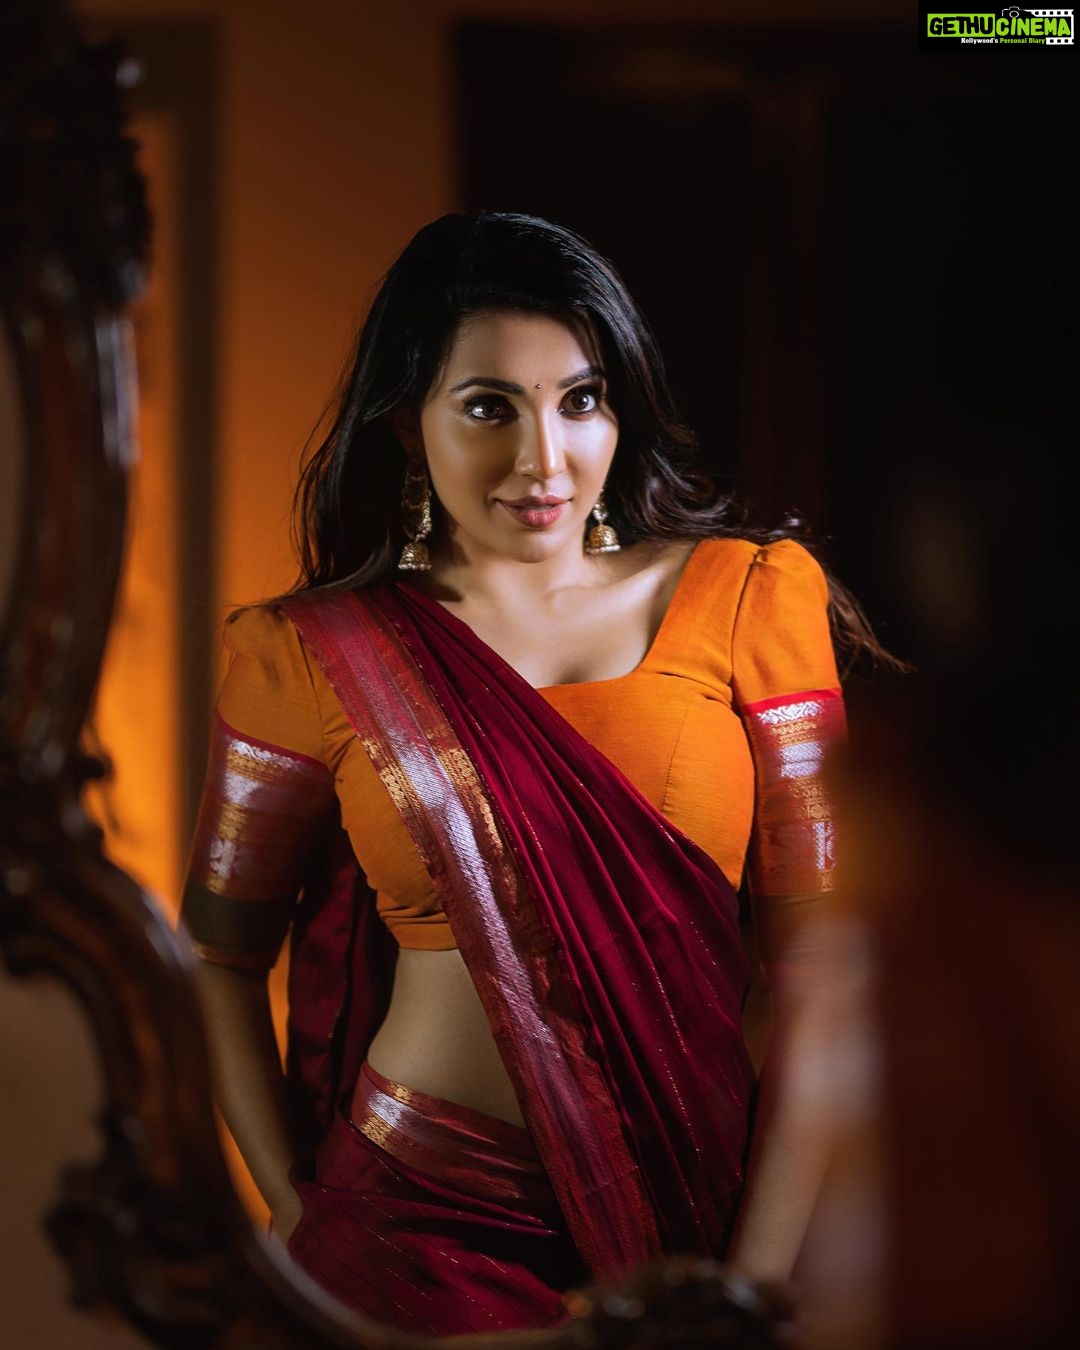 Parvatii Nair - 107.7K Likes - Most Liked Instagram Photos